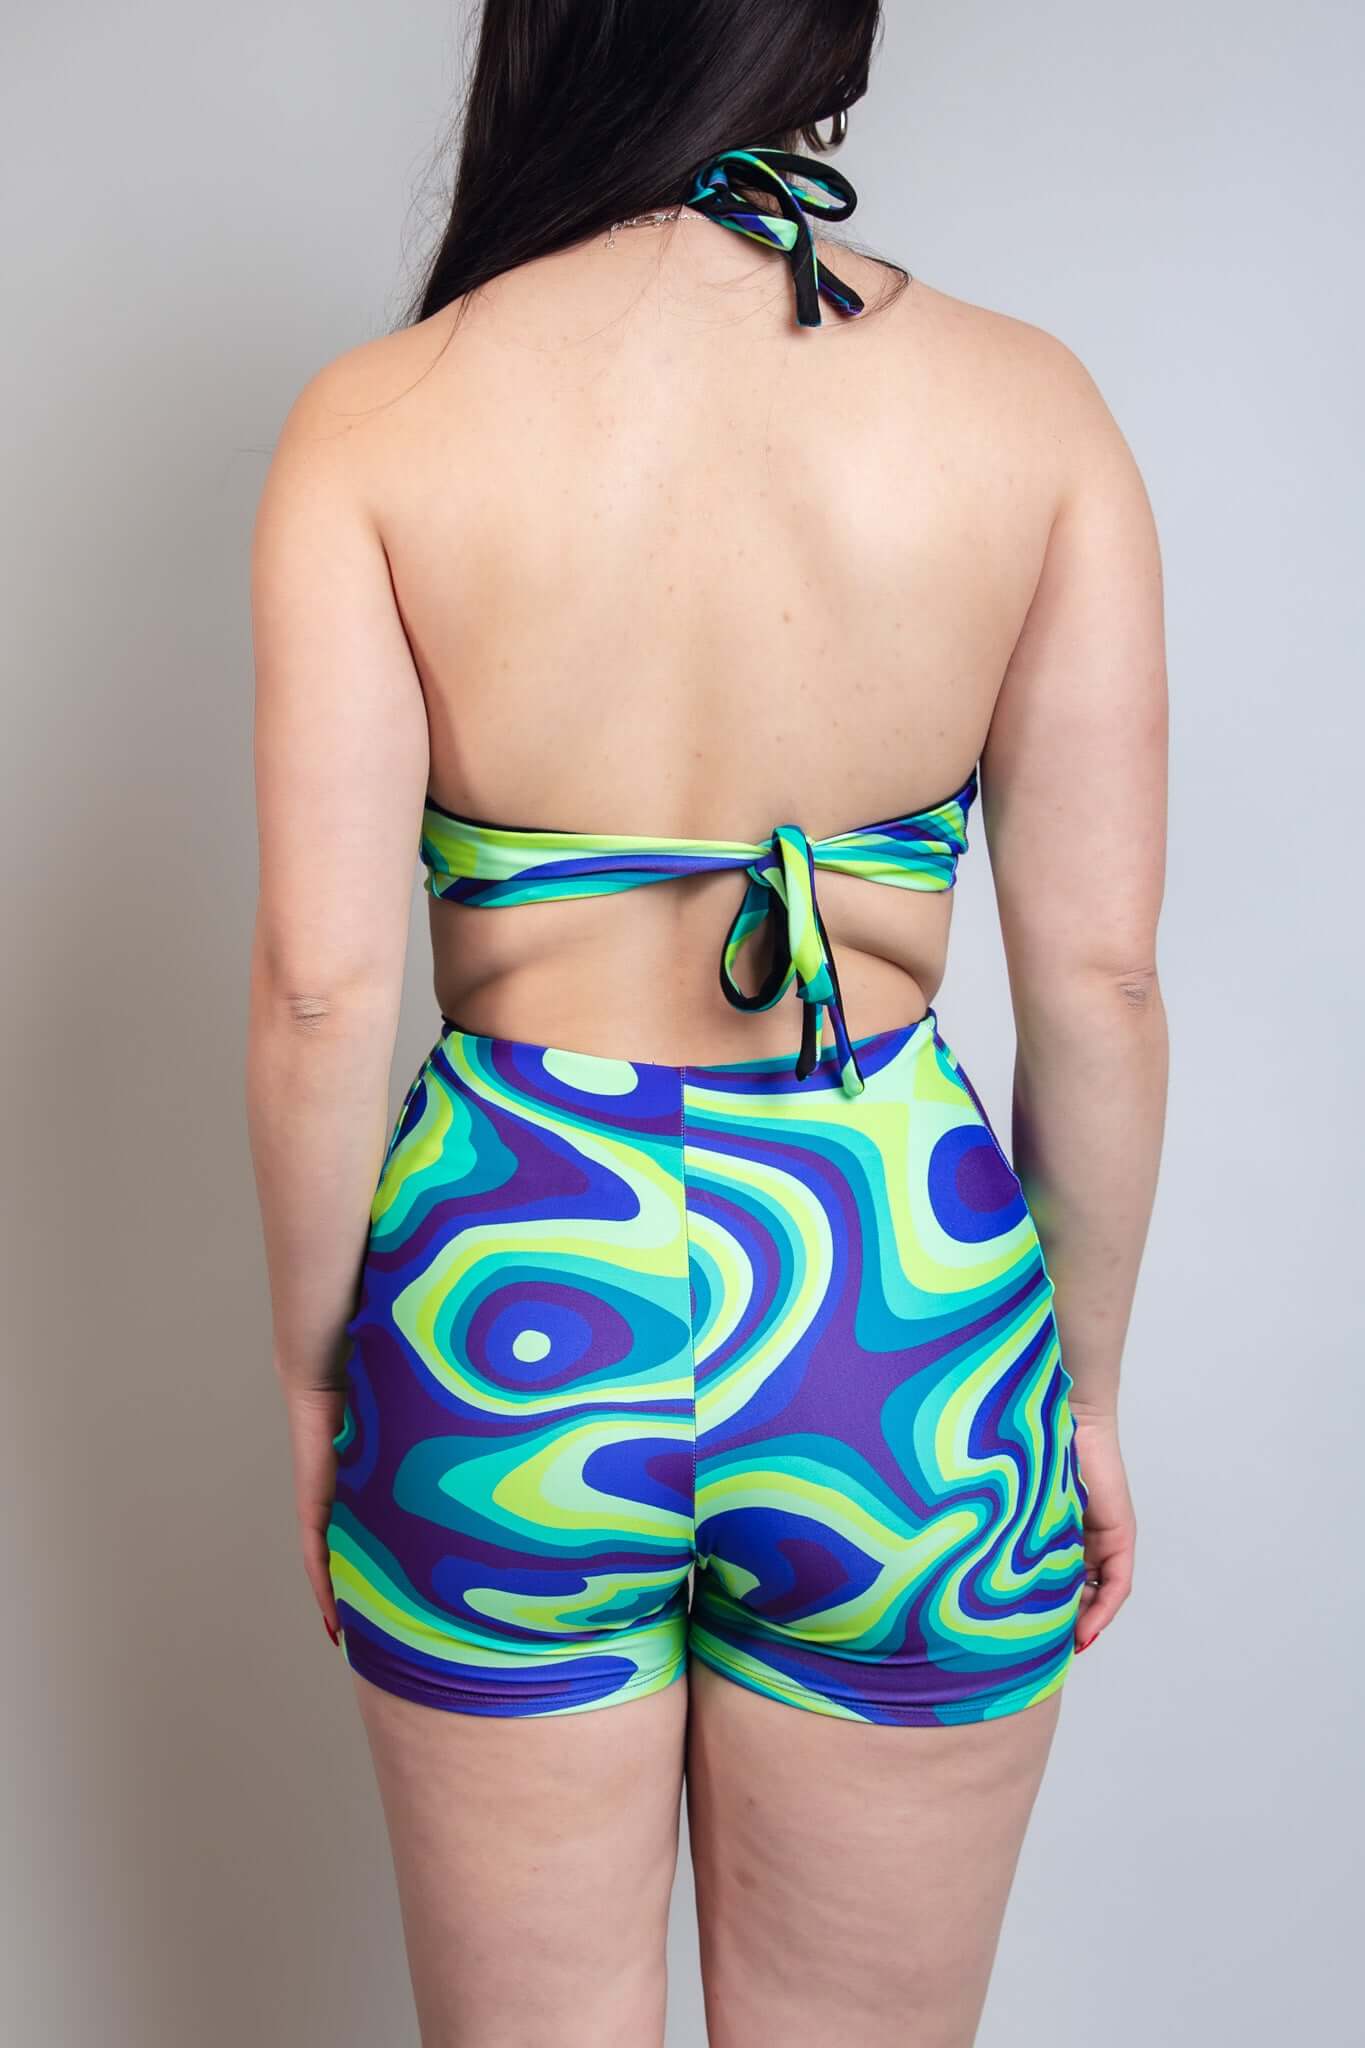 Seaglass Spiral Romper Freedom Rave Wear Size: X-Small